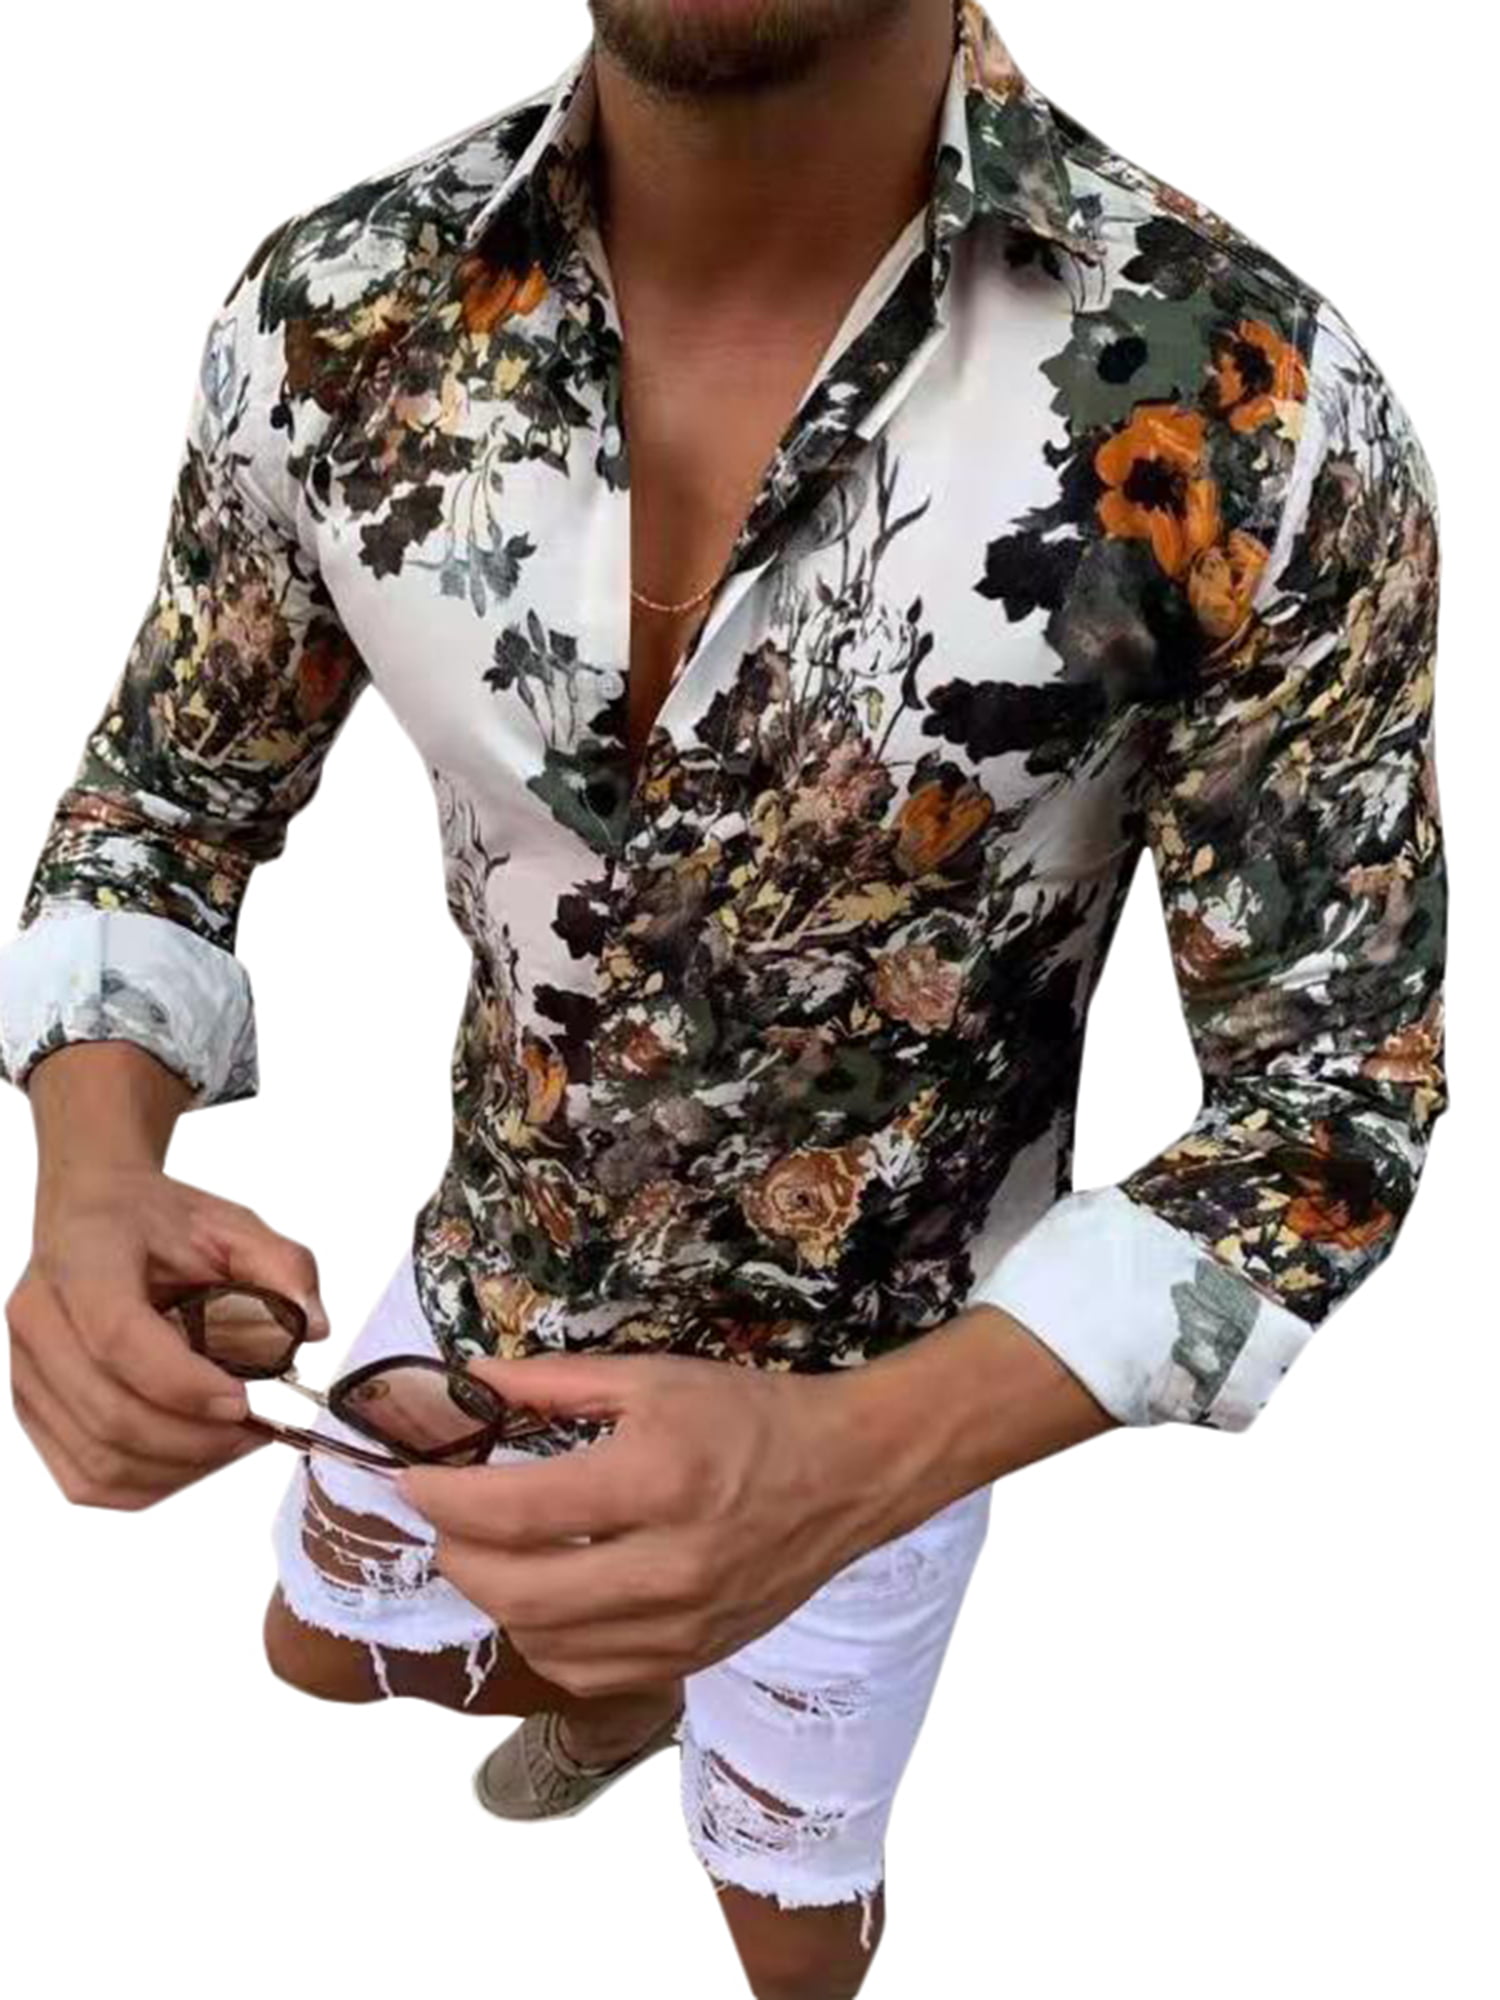 Spring New Mens Fashion Shirt Long Sleeve Button Down Lapel National Style Floral Printing Slim Fit Casual Shirt Tops 